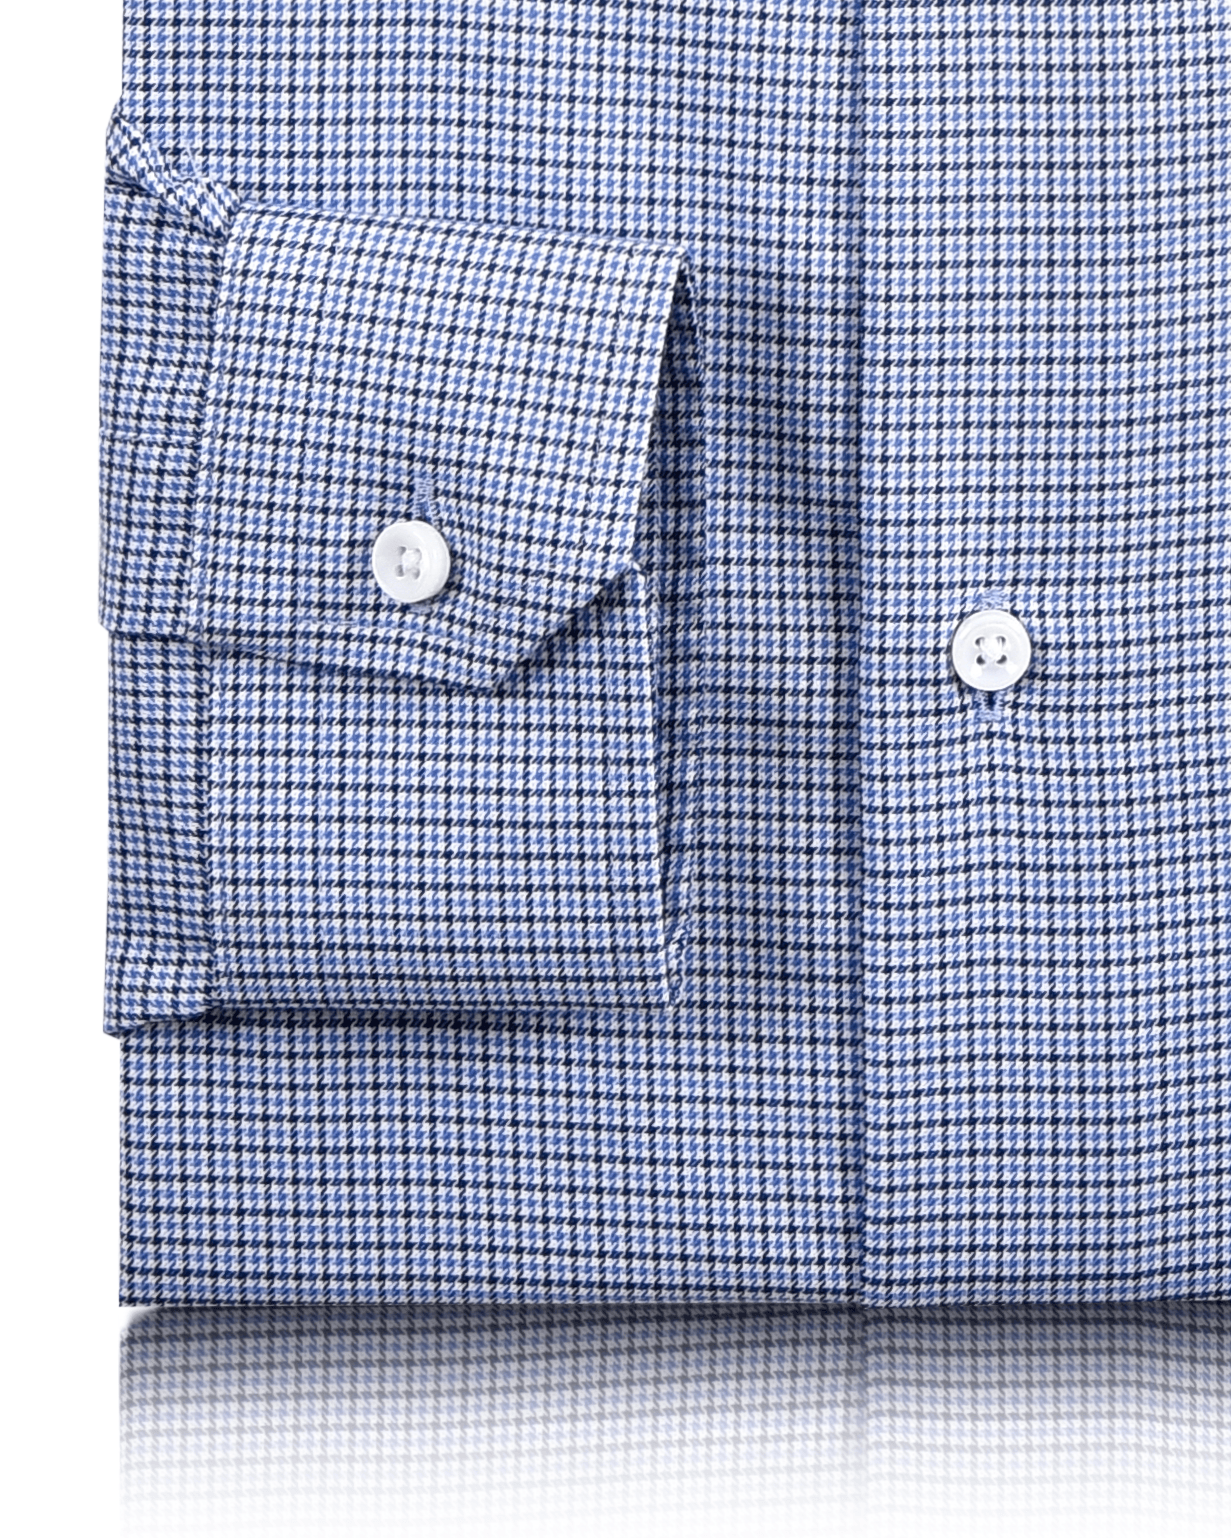 Close up cuff view of custom check shirts for men by Luxire blue and white micro houndstooth